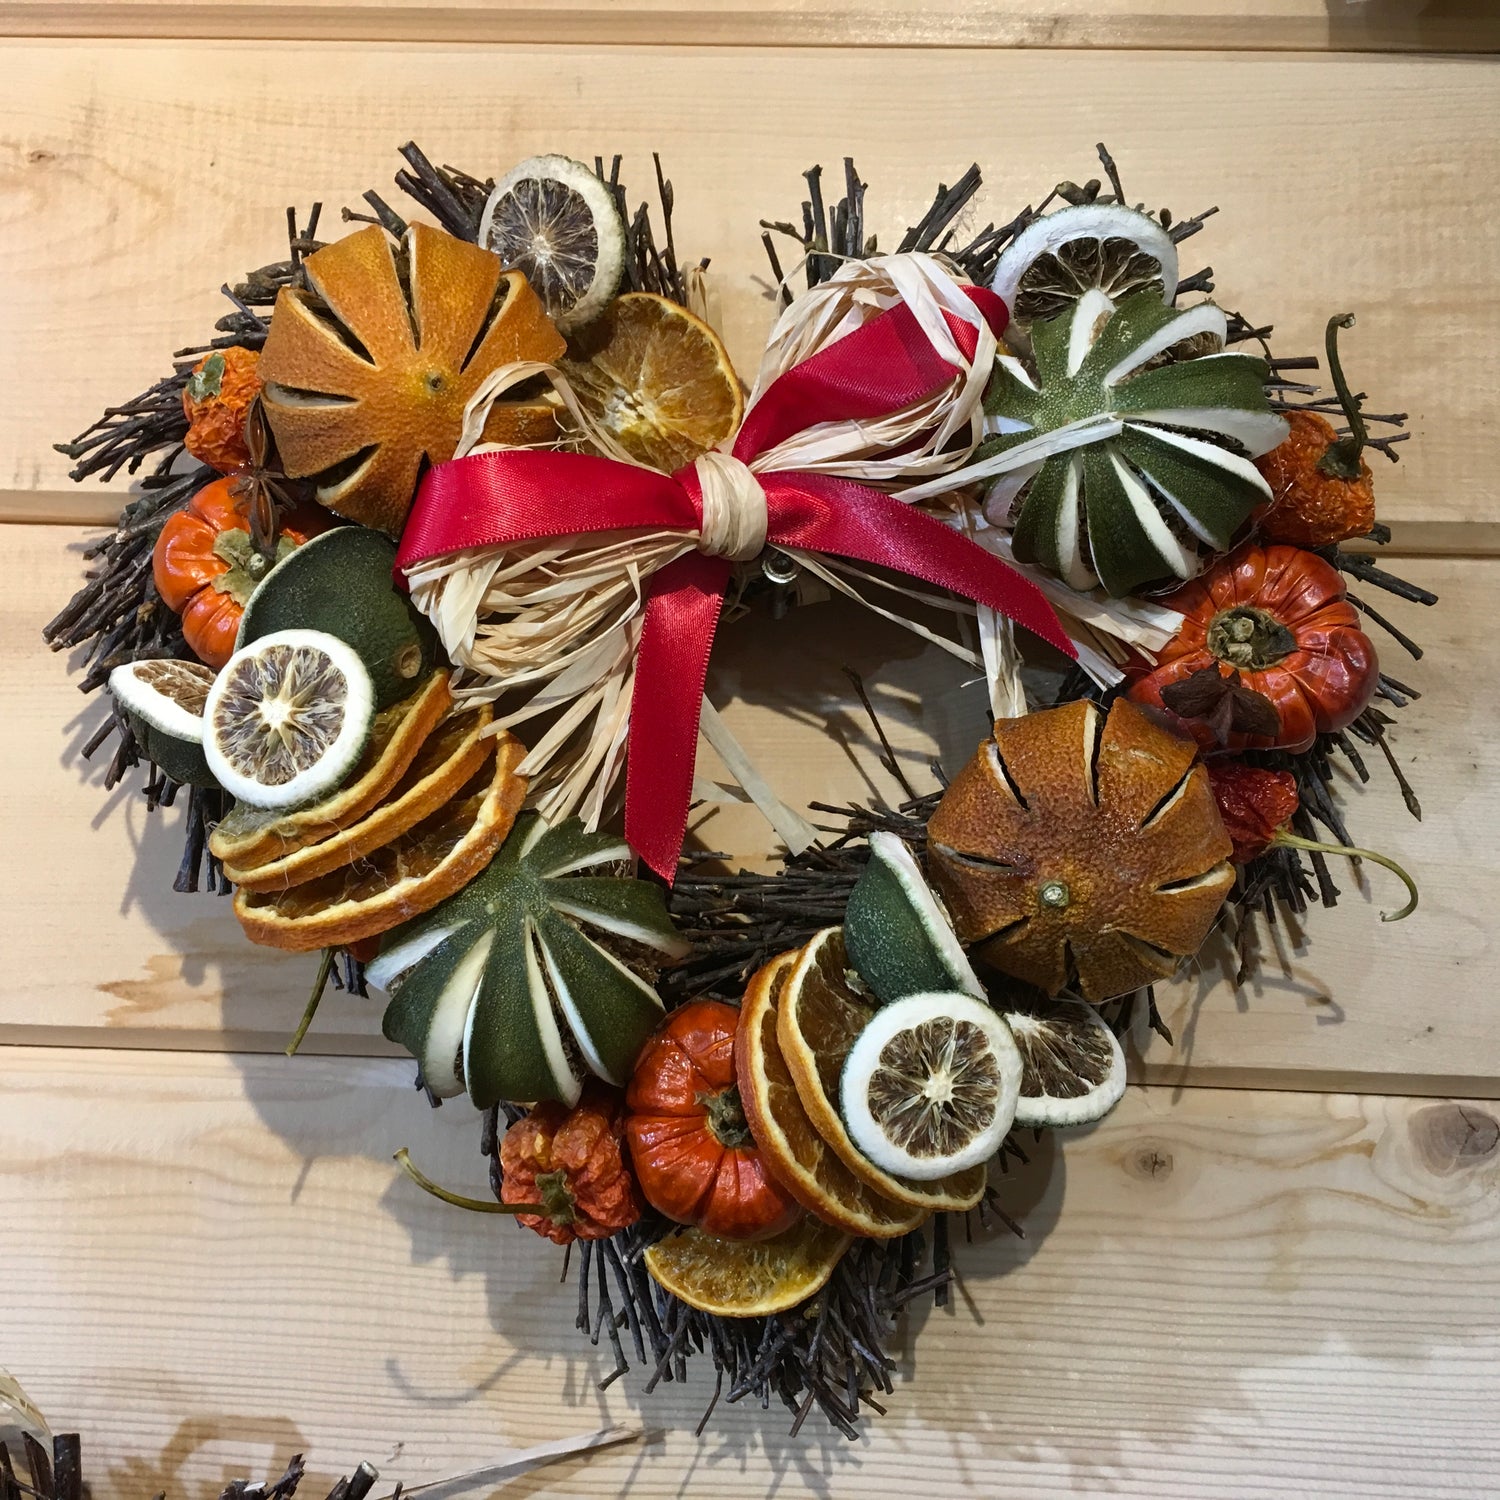 Heart shaped twig wreath that has been beautifully decorated with an assortment of dried fruits, and cinnamon sticks and scented with a wonderful Christmas fragrance. With an additional decorative red bow and hanger.